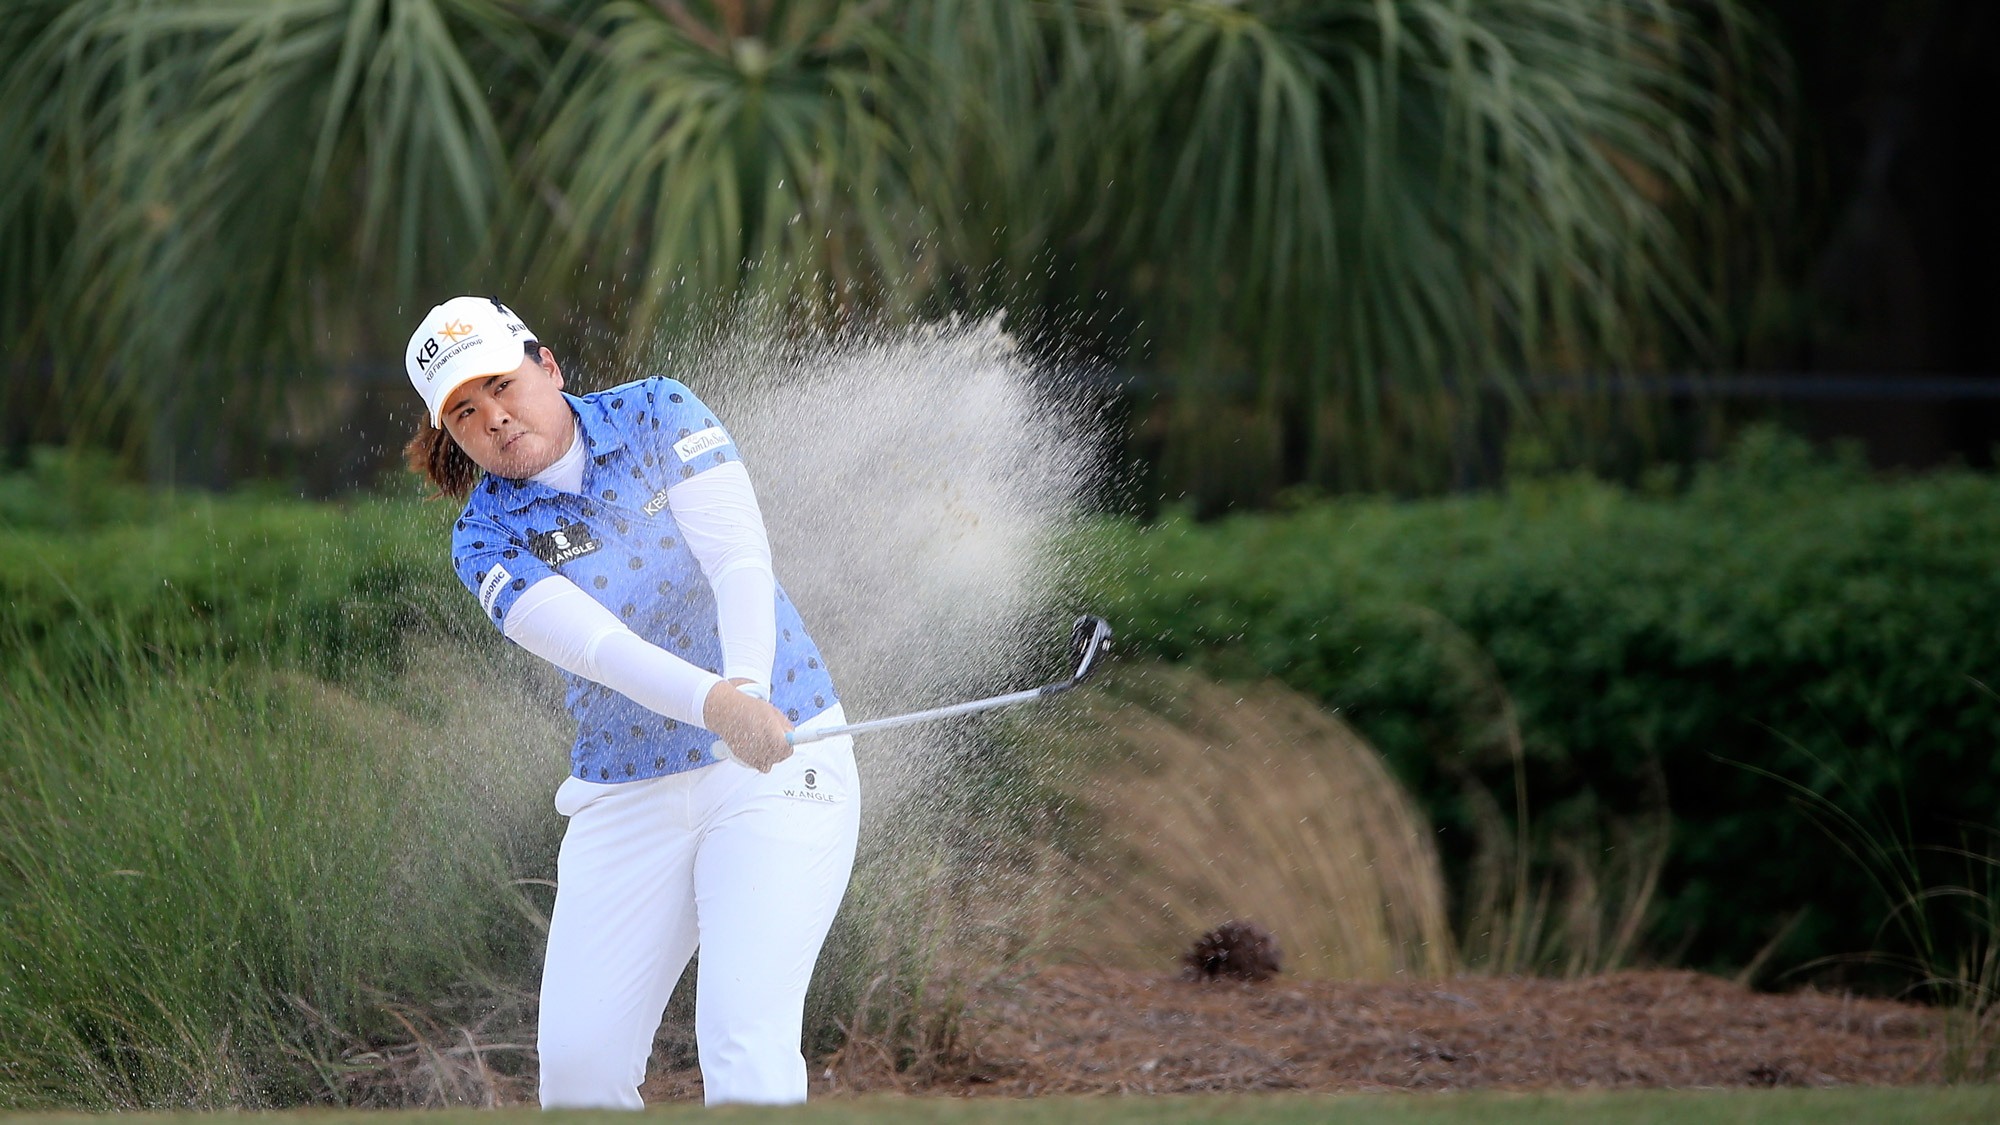 Inbee Park of South Korea plays a shot on the sixth hole during the first round of the CME Group Tour Championship at Tiburon Golf Club